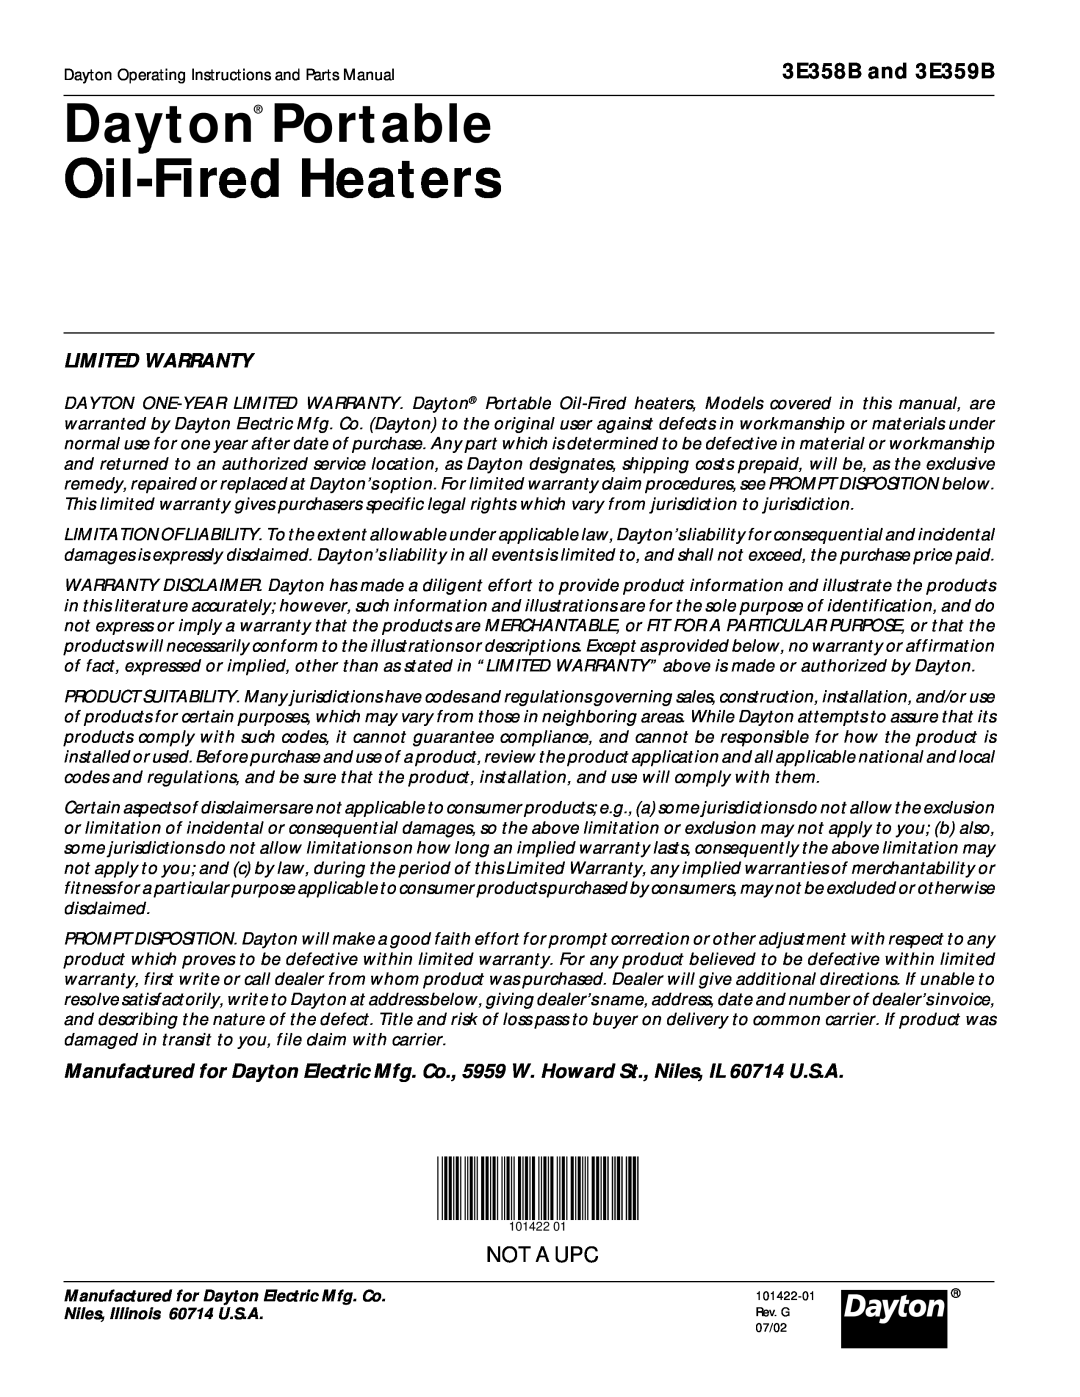 Dayton specifications Limited Warranty, Dayton Portable Oil-FiredHeaters, 3E358B and 3E359B, Not A Upc 